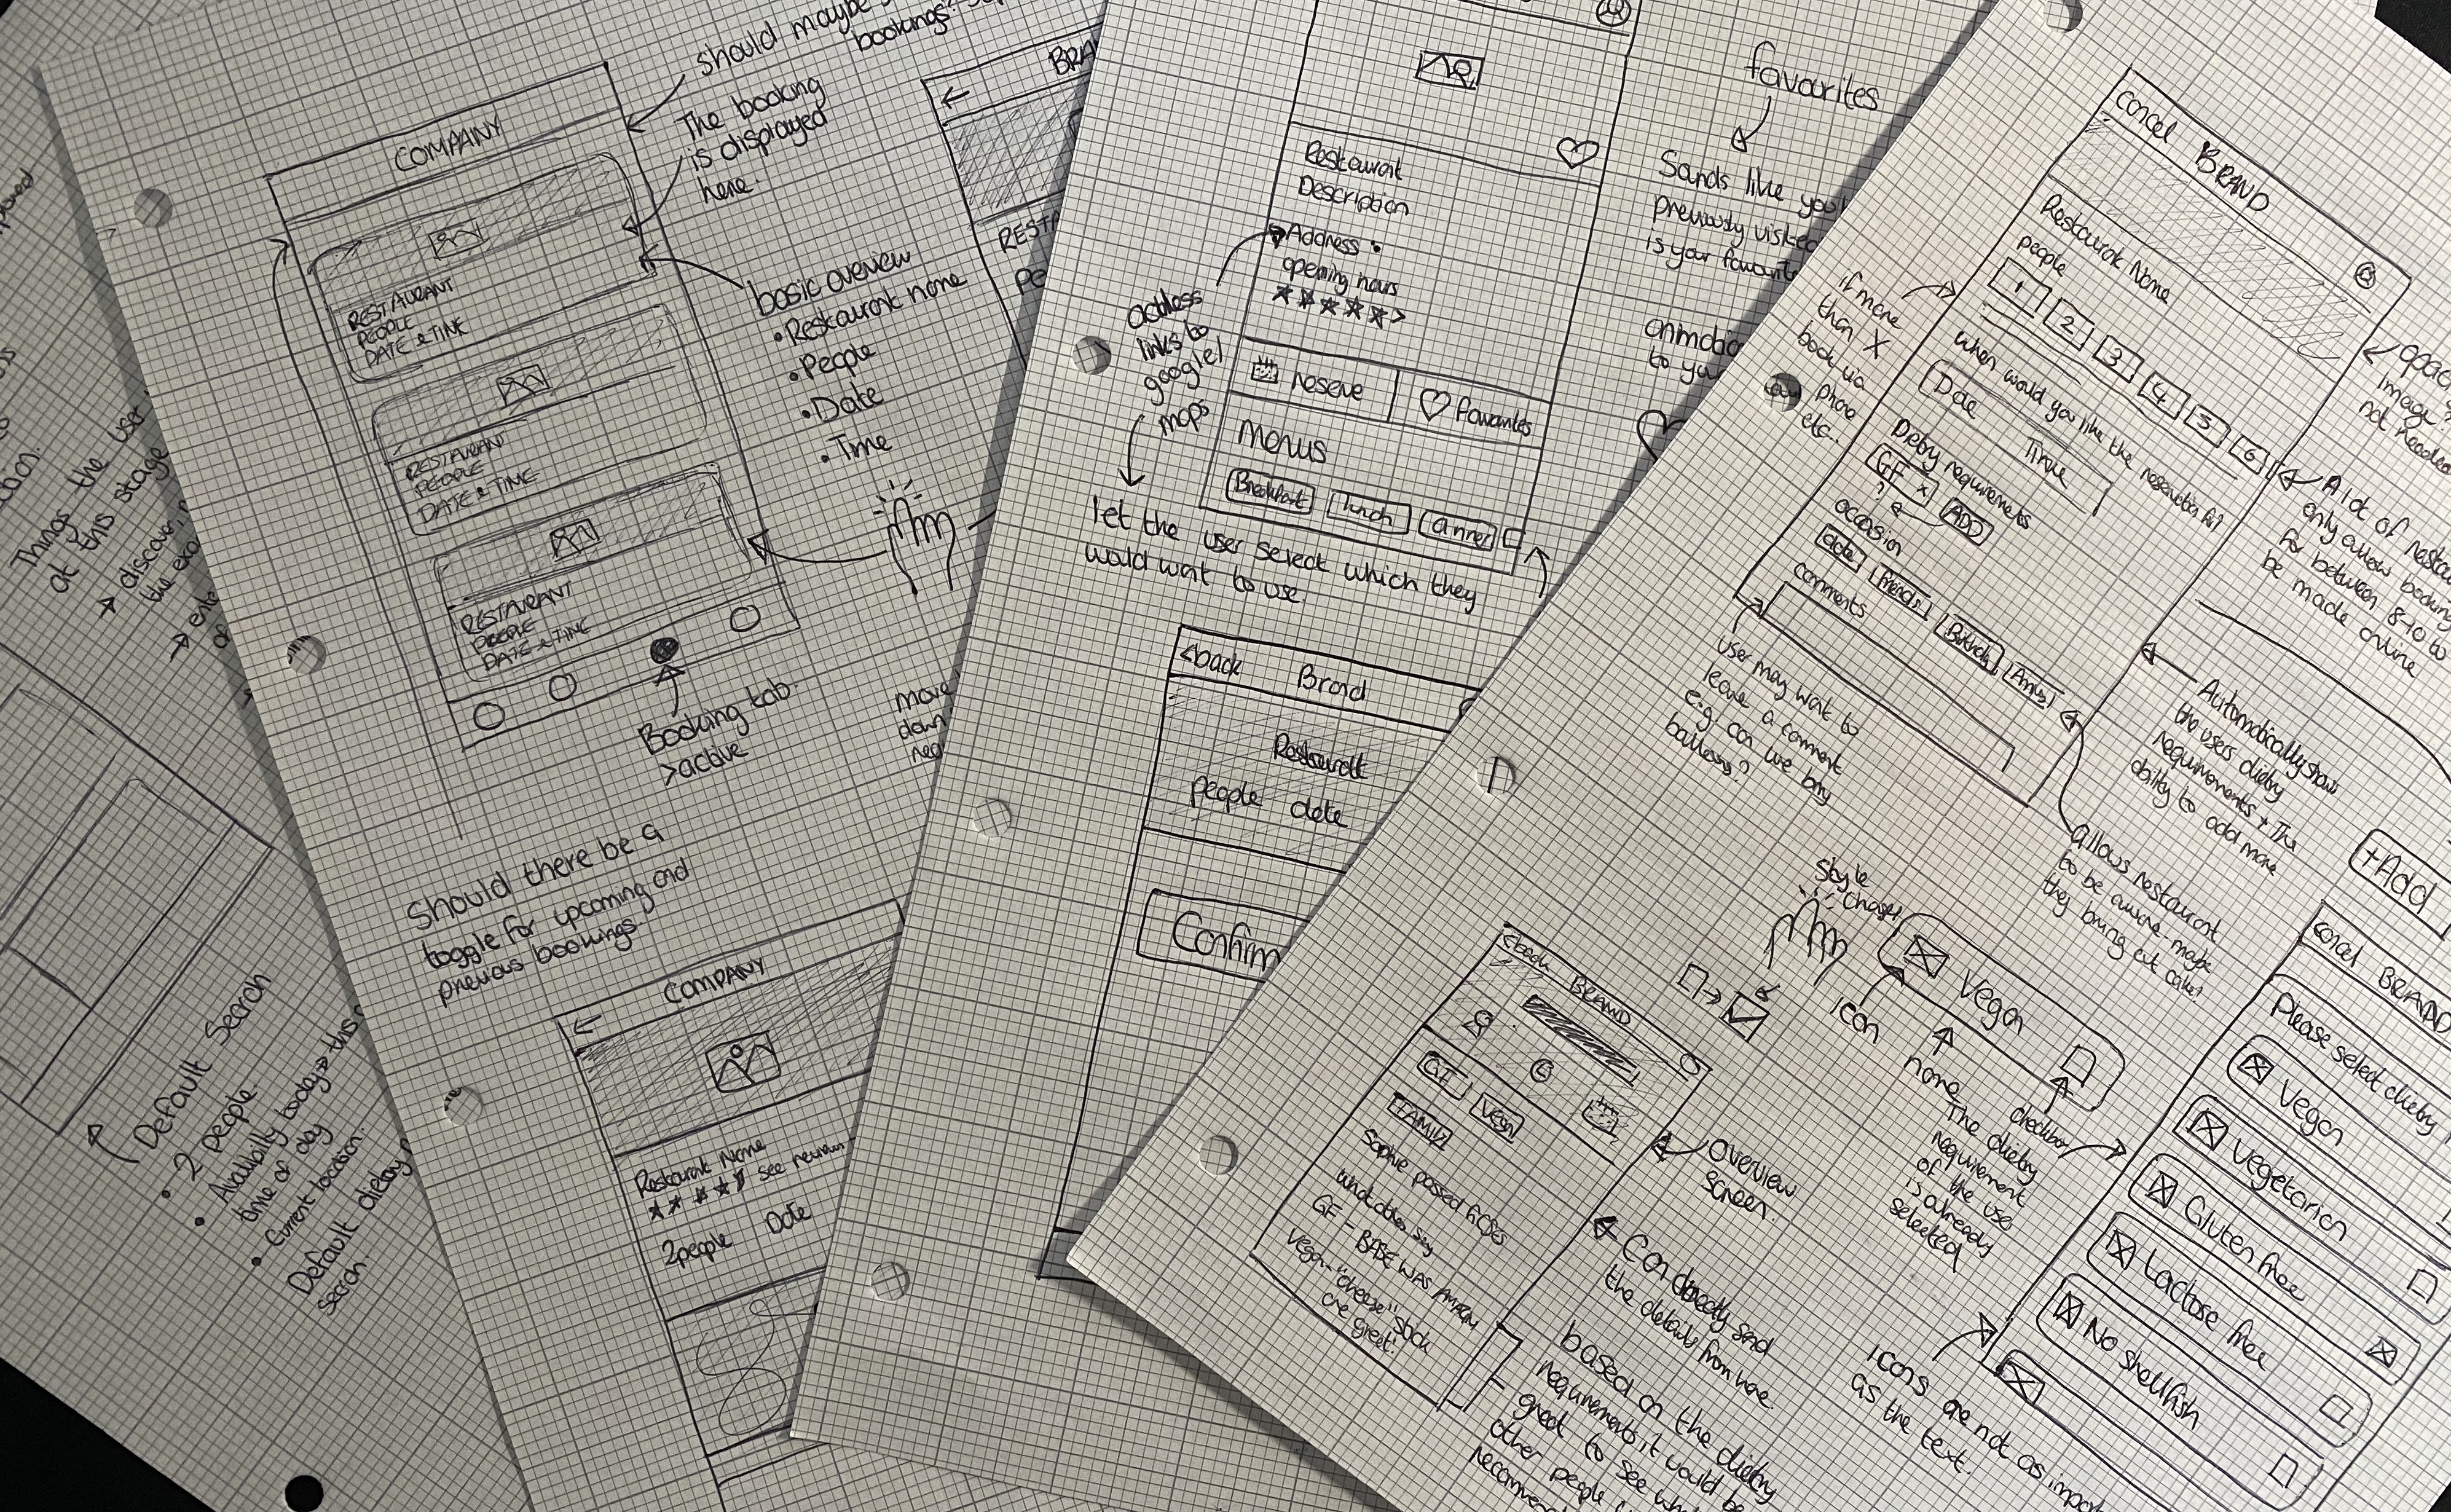 sketched wireframes showing the layout and ideas behind Abunci